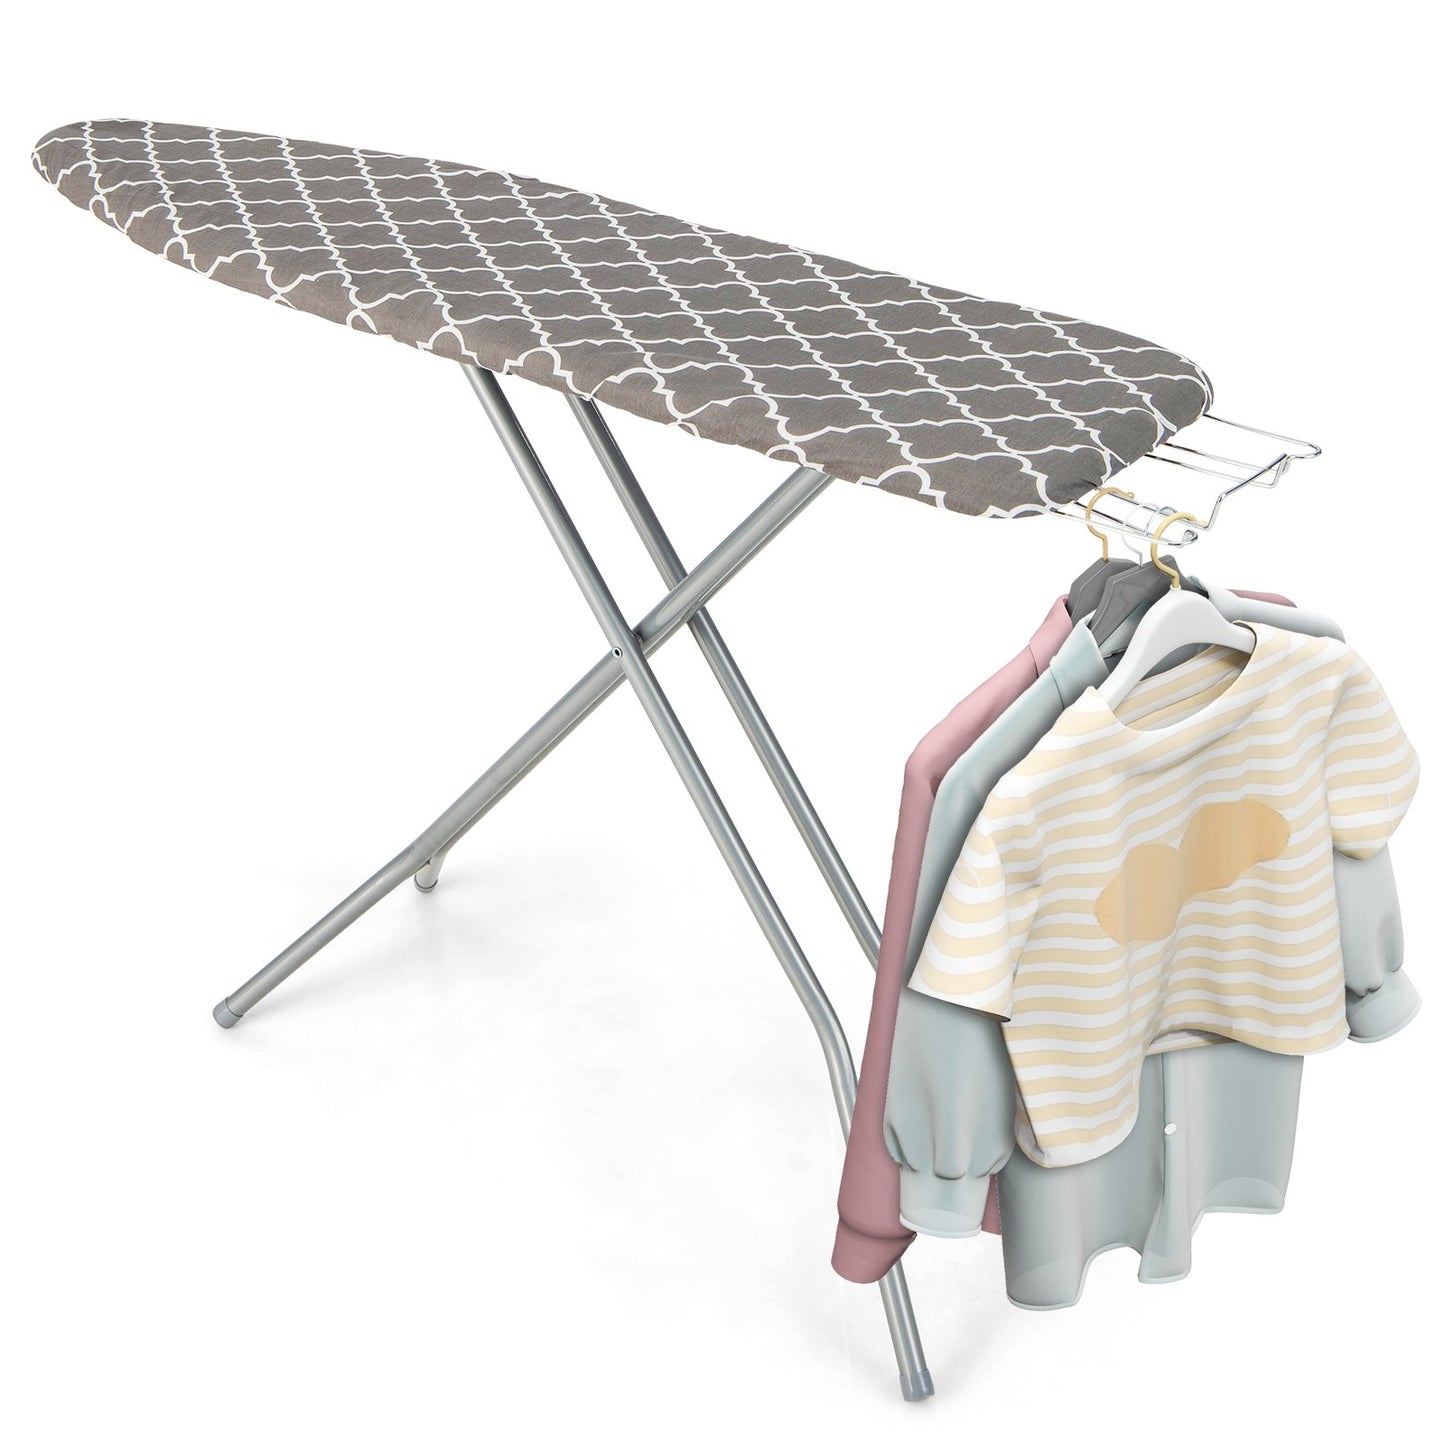 60 x 15 Inch Foldable Ironing Board with Iron Rest Extra Cotton Cover, Gray